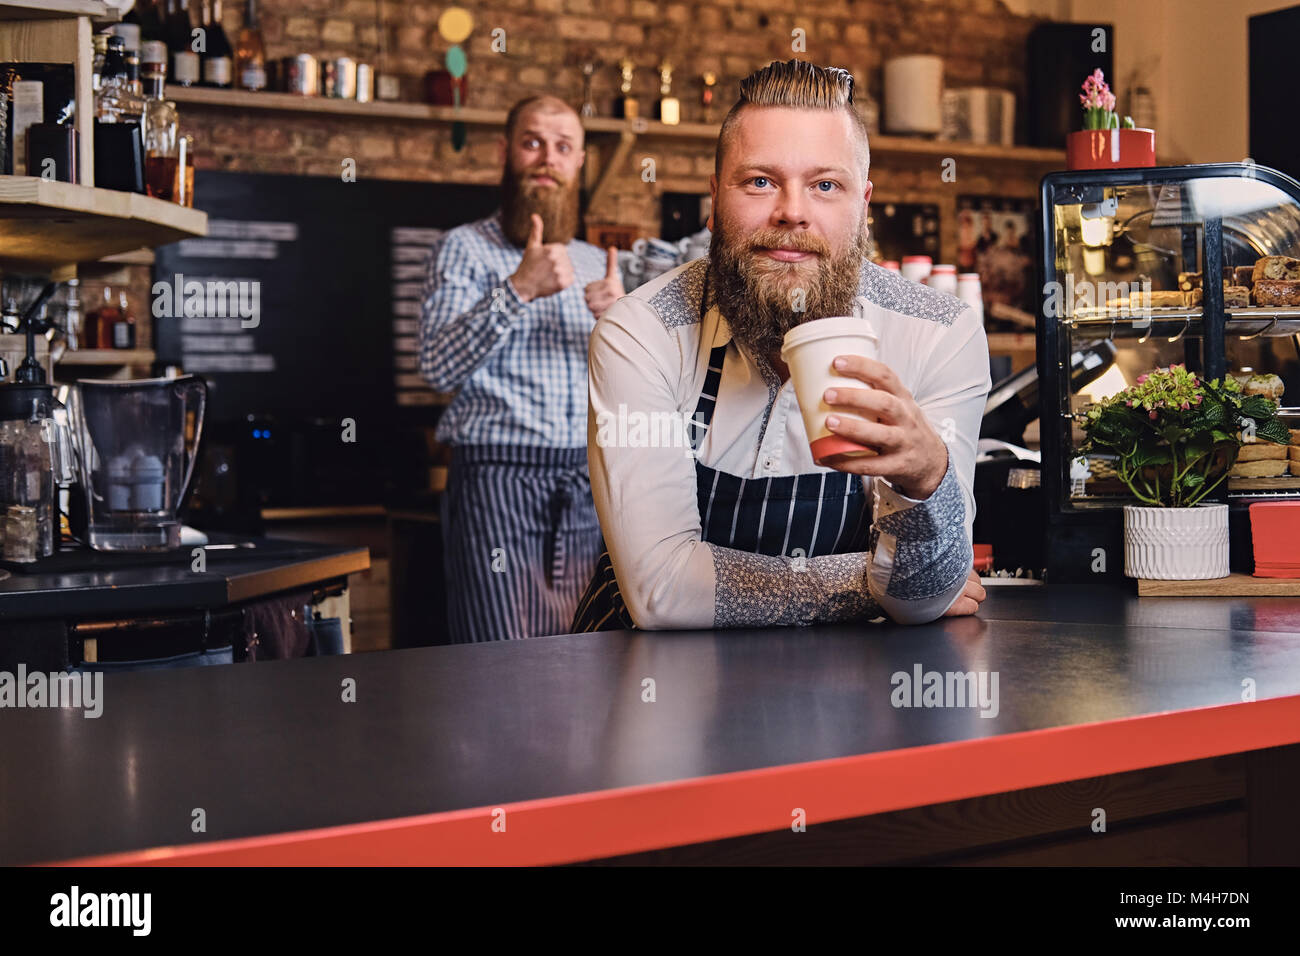 https://c8.alamy.com/comp/M4H7DN/portrait-of-redhead-bearded-barista-male-at-bar-stand-in-a-coffee-M4H7DN.jpg